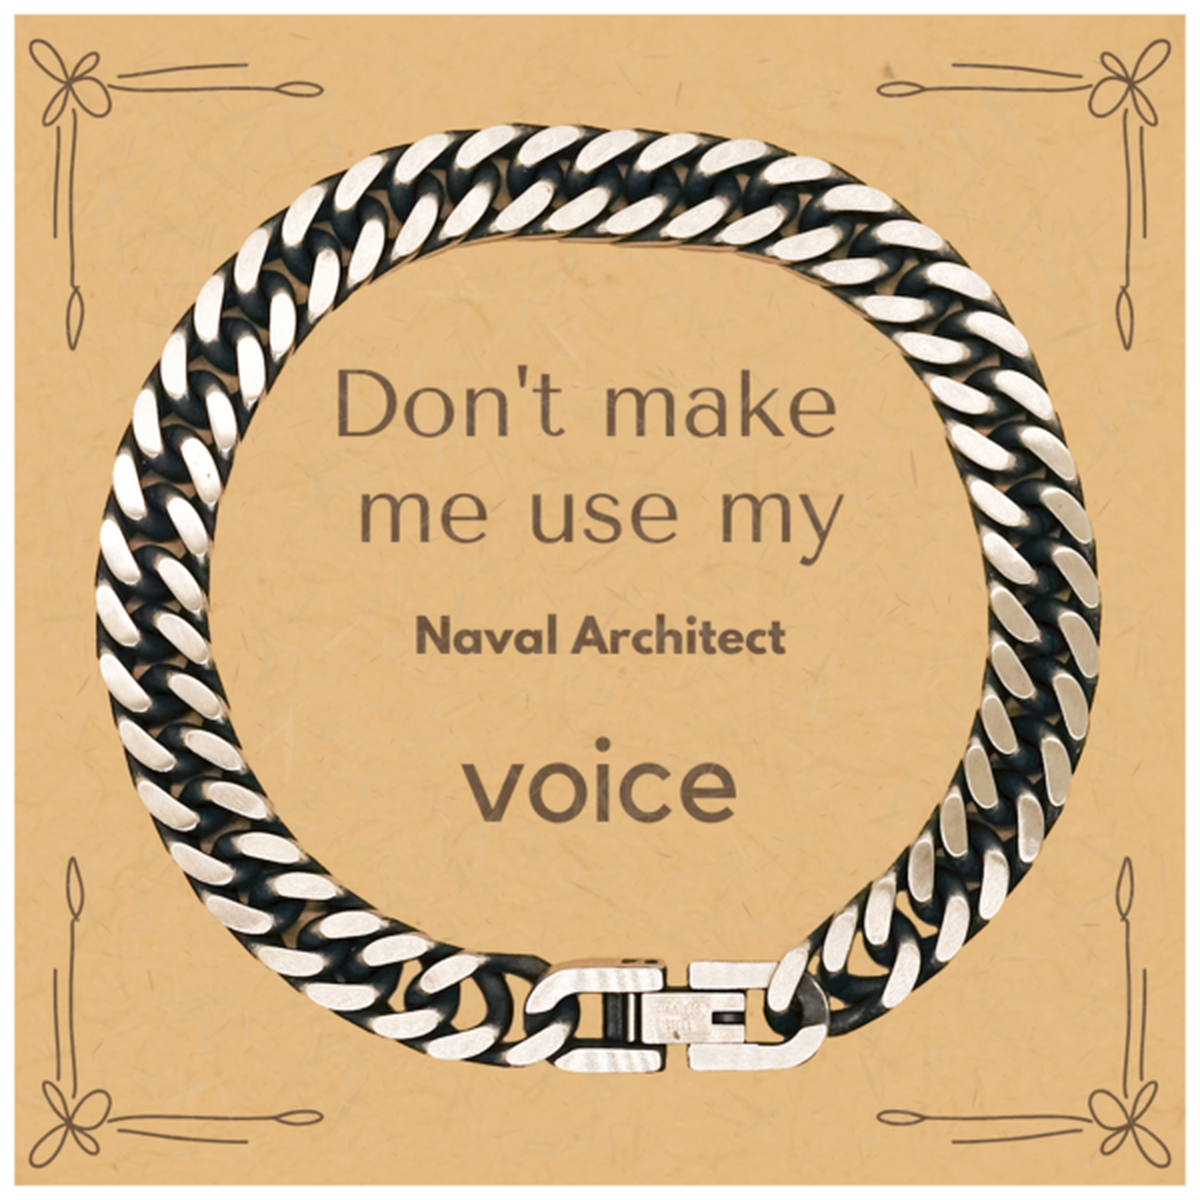 Don't make me use my Naval Architect voice, Sarcasm Naval Architect Card Gifts, Christmas Naval Architect Cuban Link Chain Bracelet Birthday Unique Gifts For Naval Architect Coworkers, Men, Women, Colleague, Friends